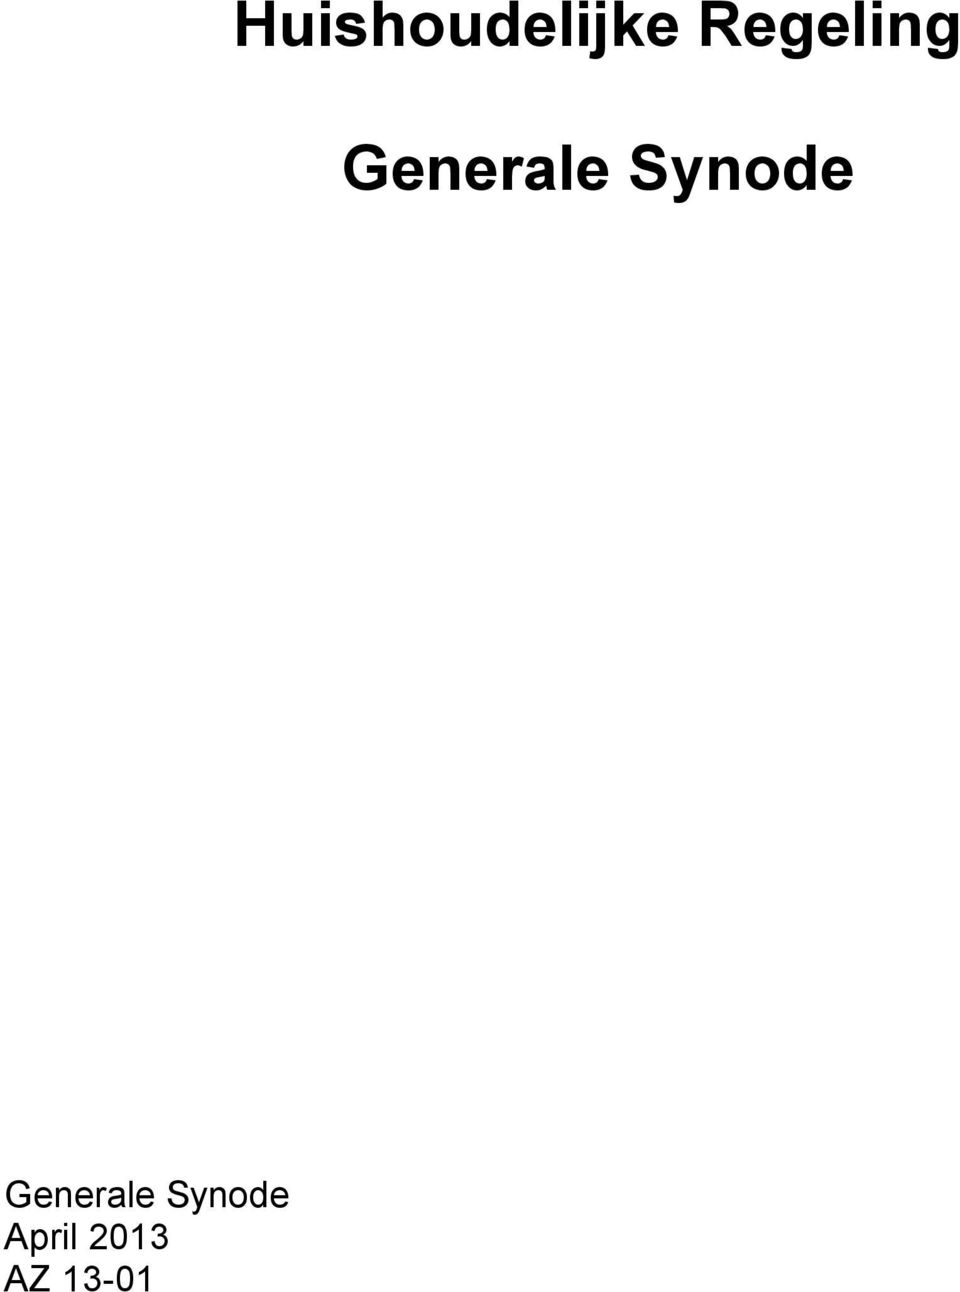 Synode Generale